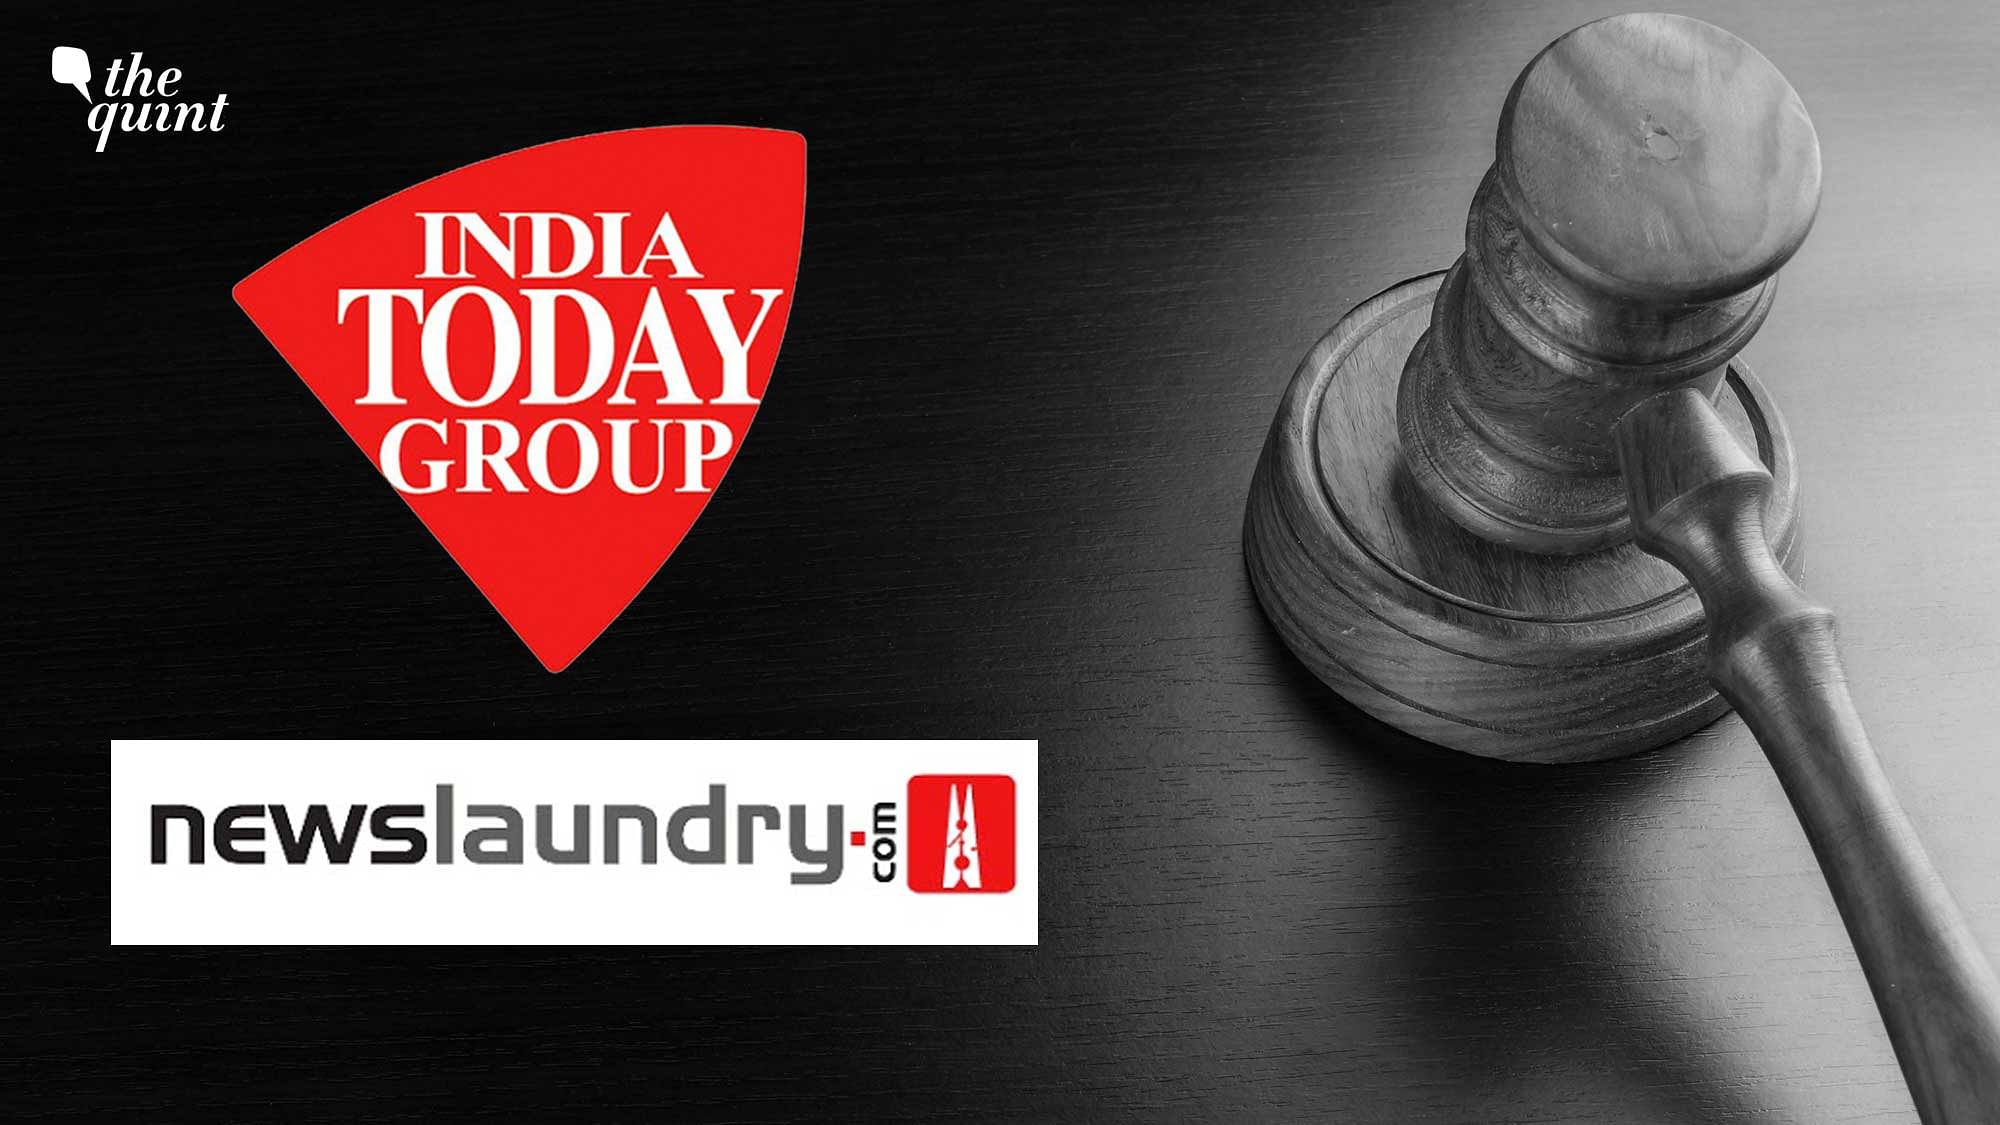 <div class="paragraphs"><p>The group, which owns India Today, has sued Newslaundry for defamation and copyright infringement.</p></div>